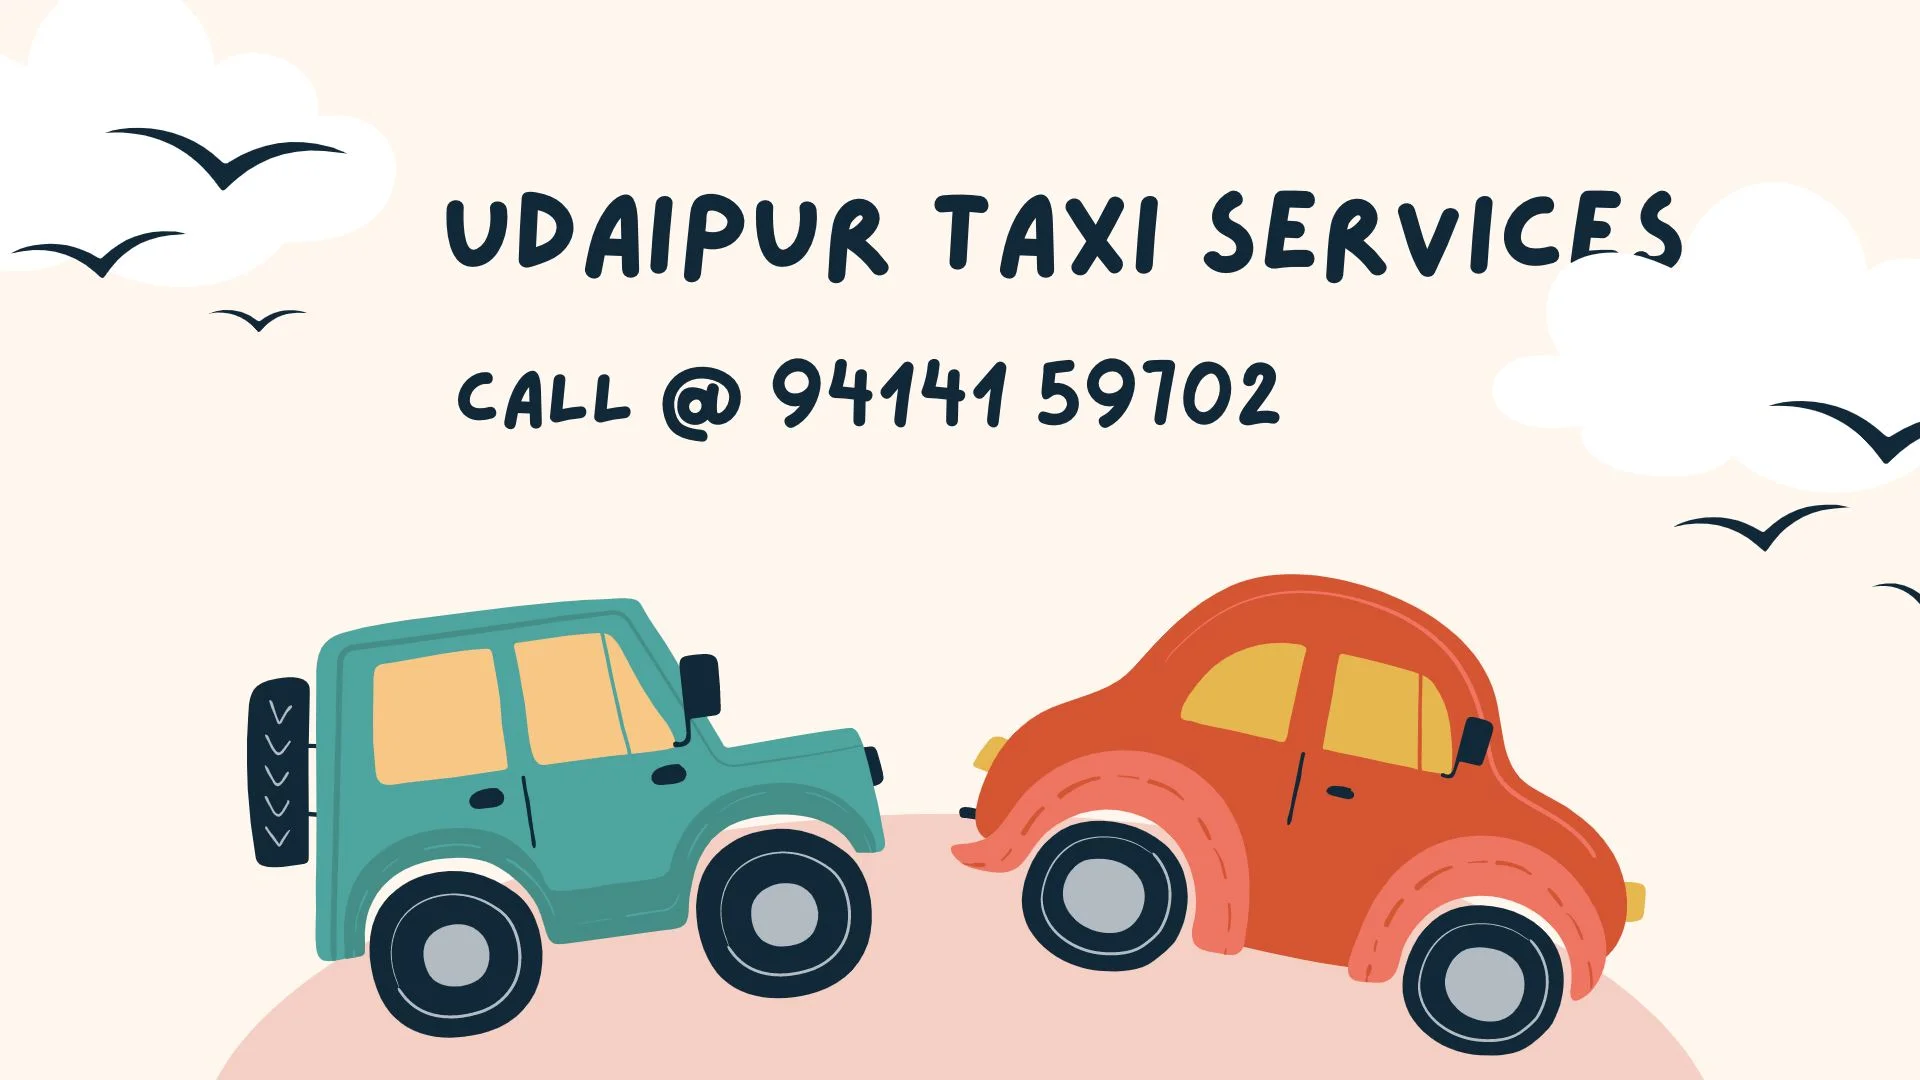 Cartoon 2 Car for images for udaipur car rent Online Booking Taxi App